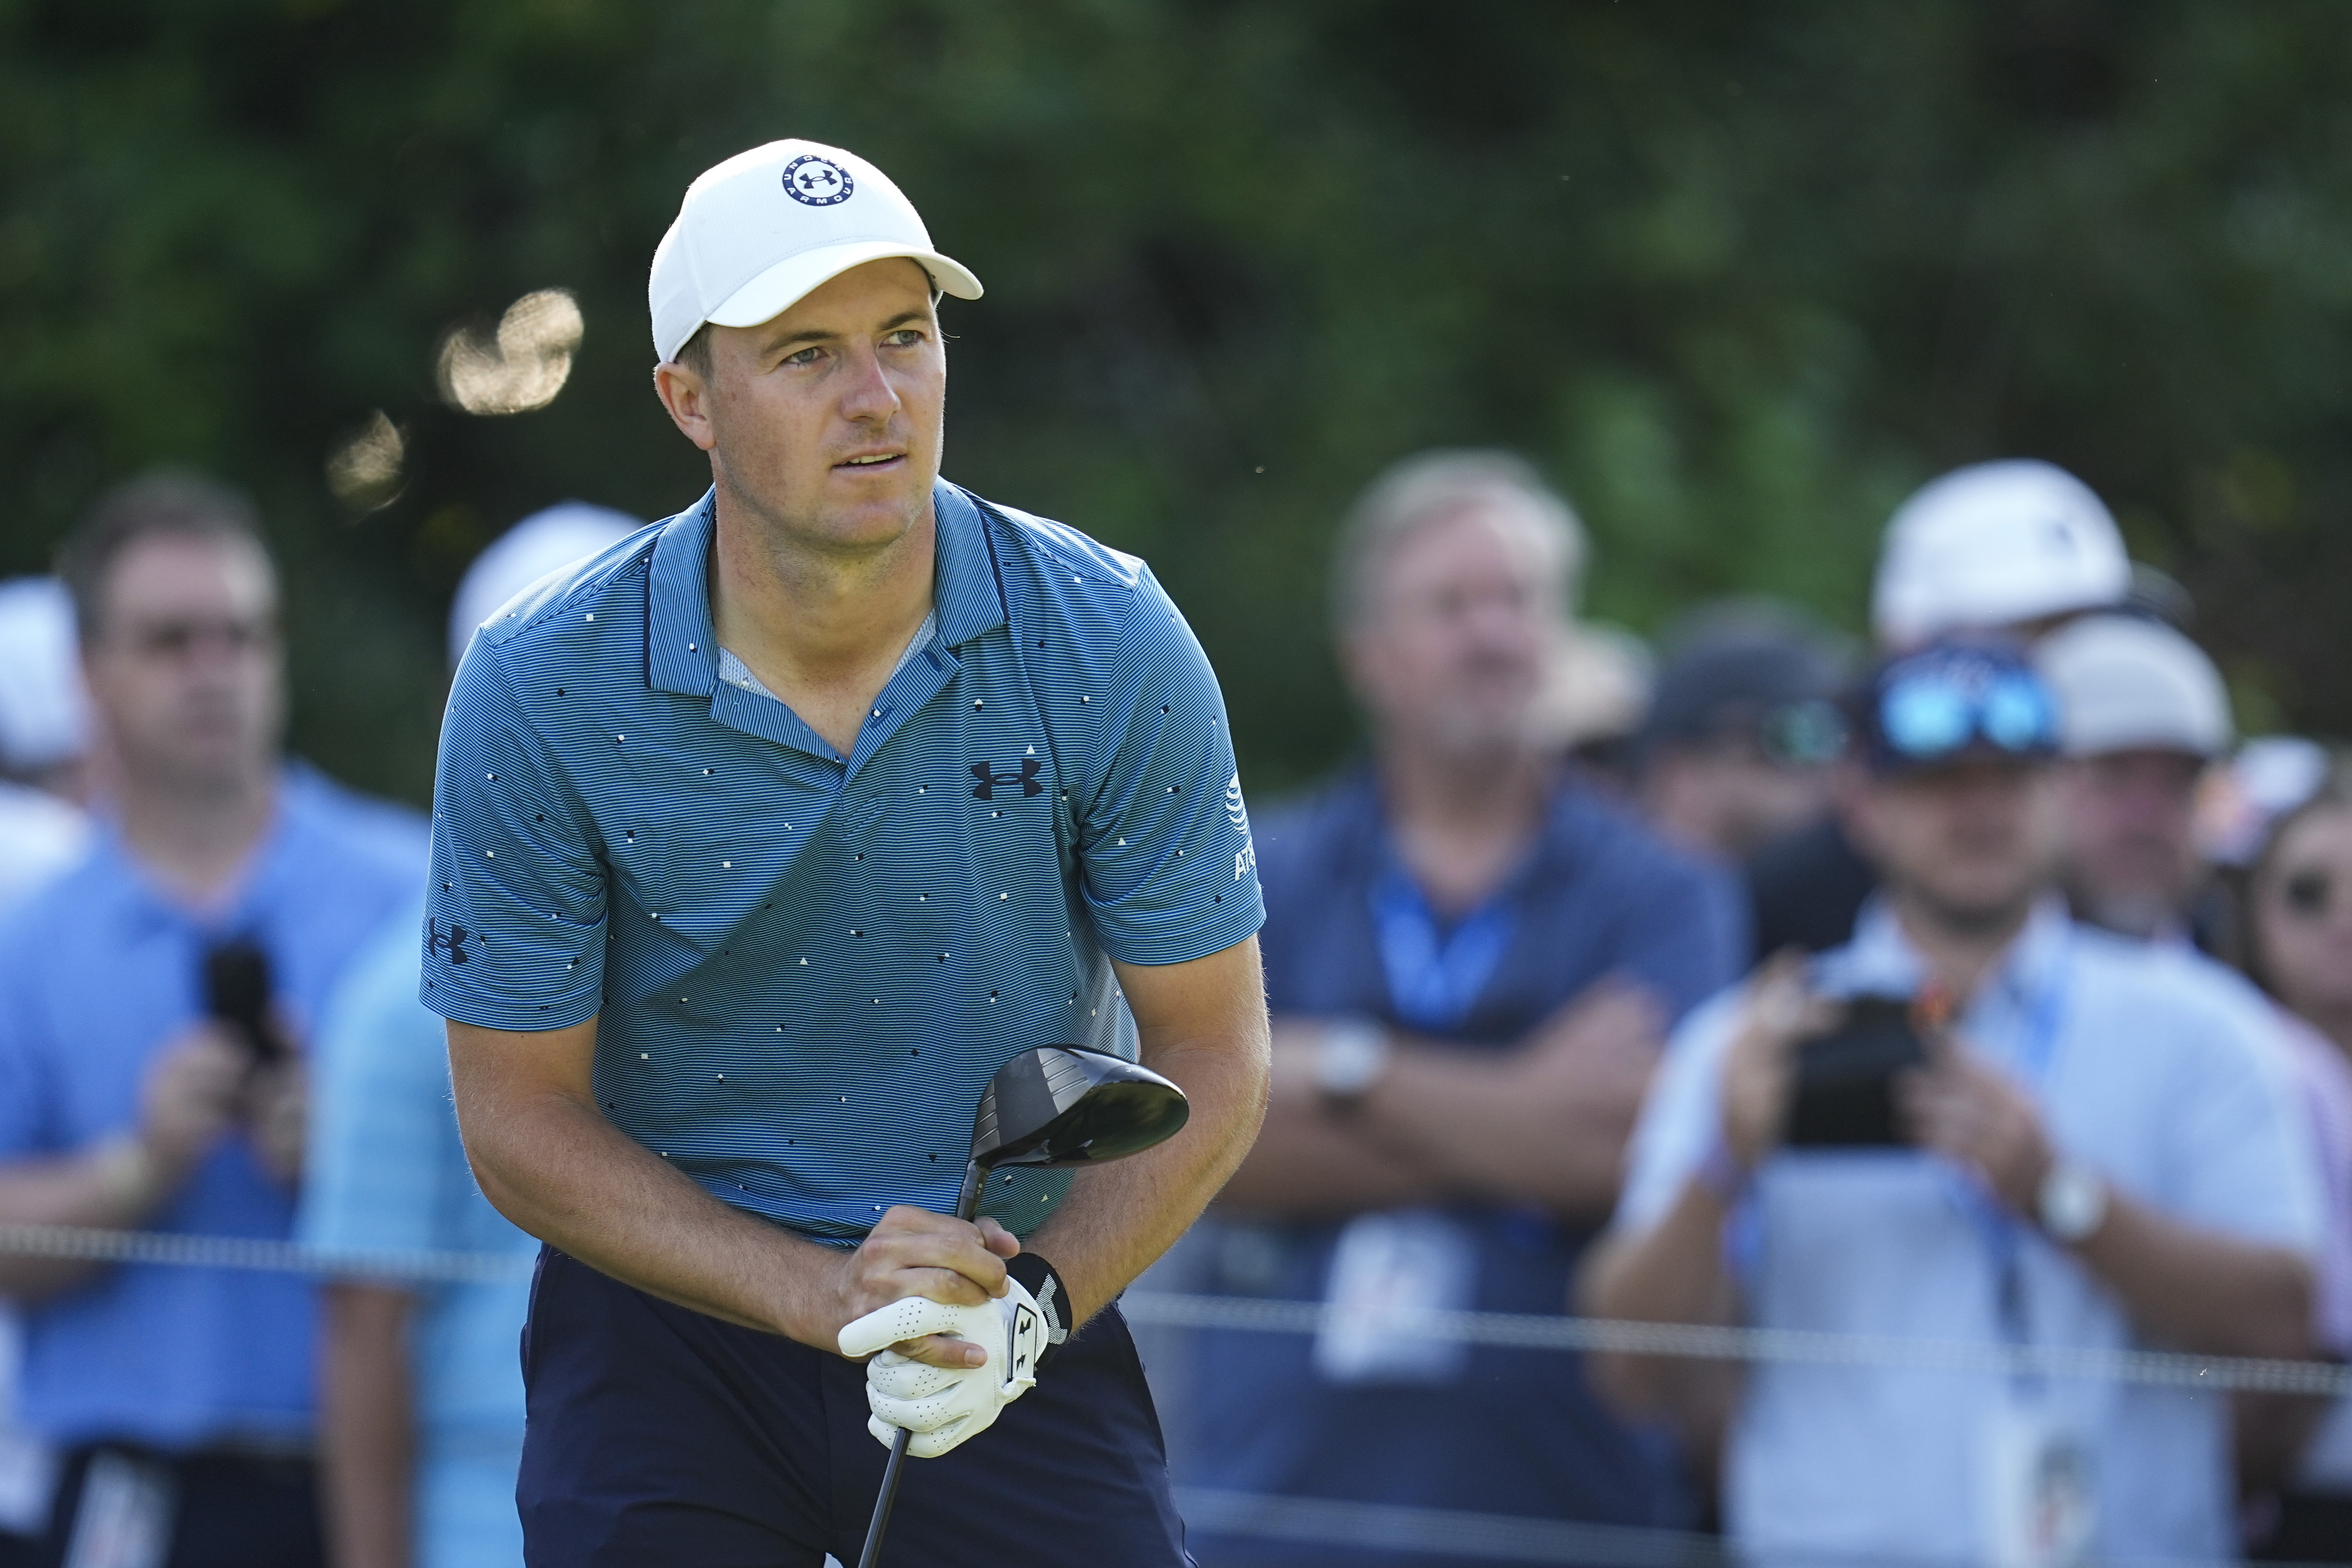 Watch Jordan Spieth regroups after losing train of thought at Memorial Tournament